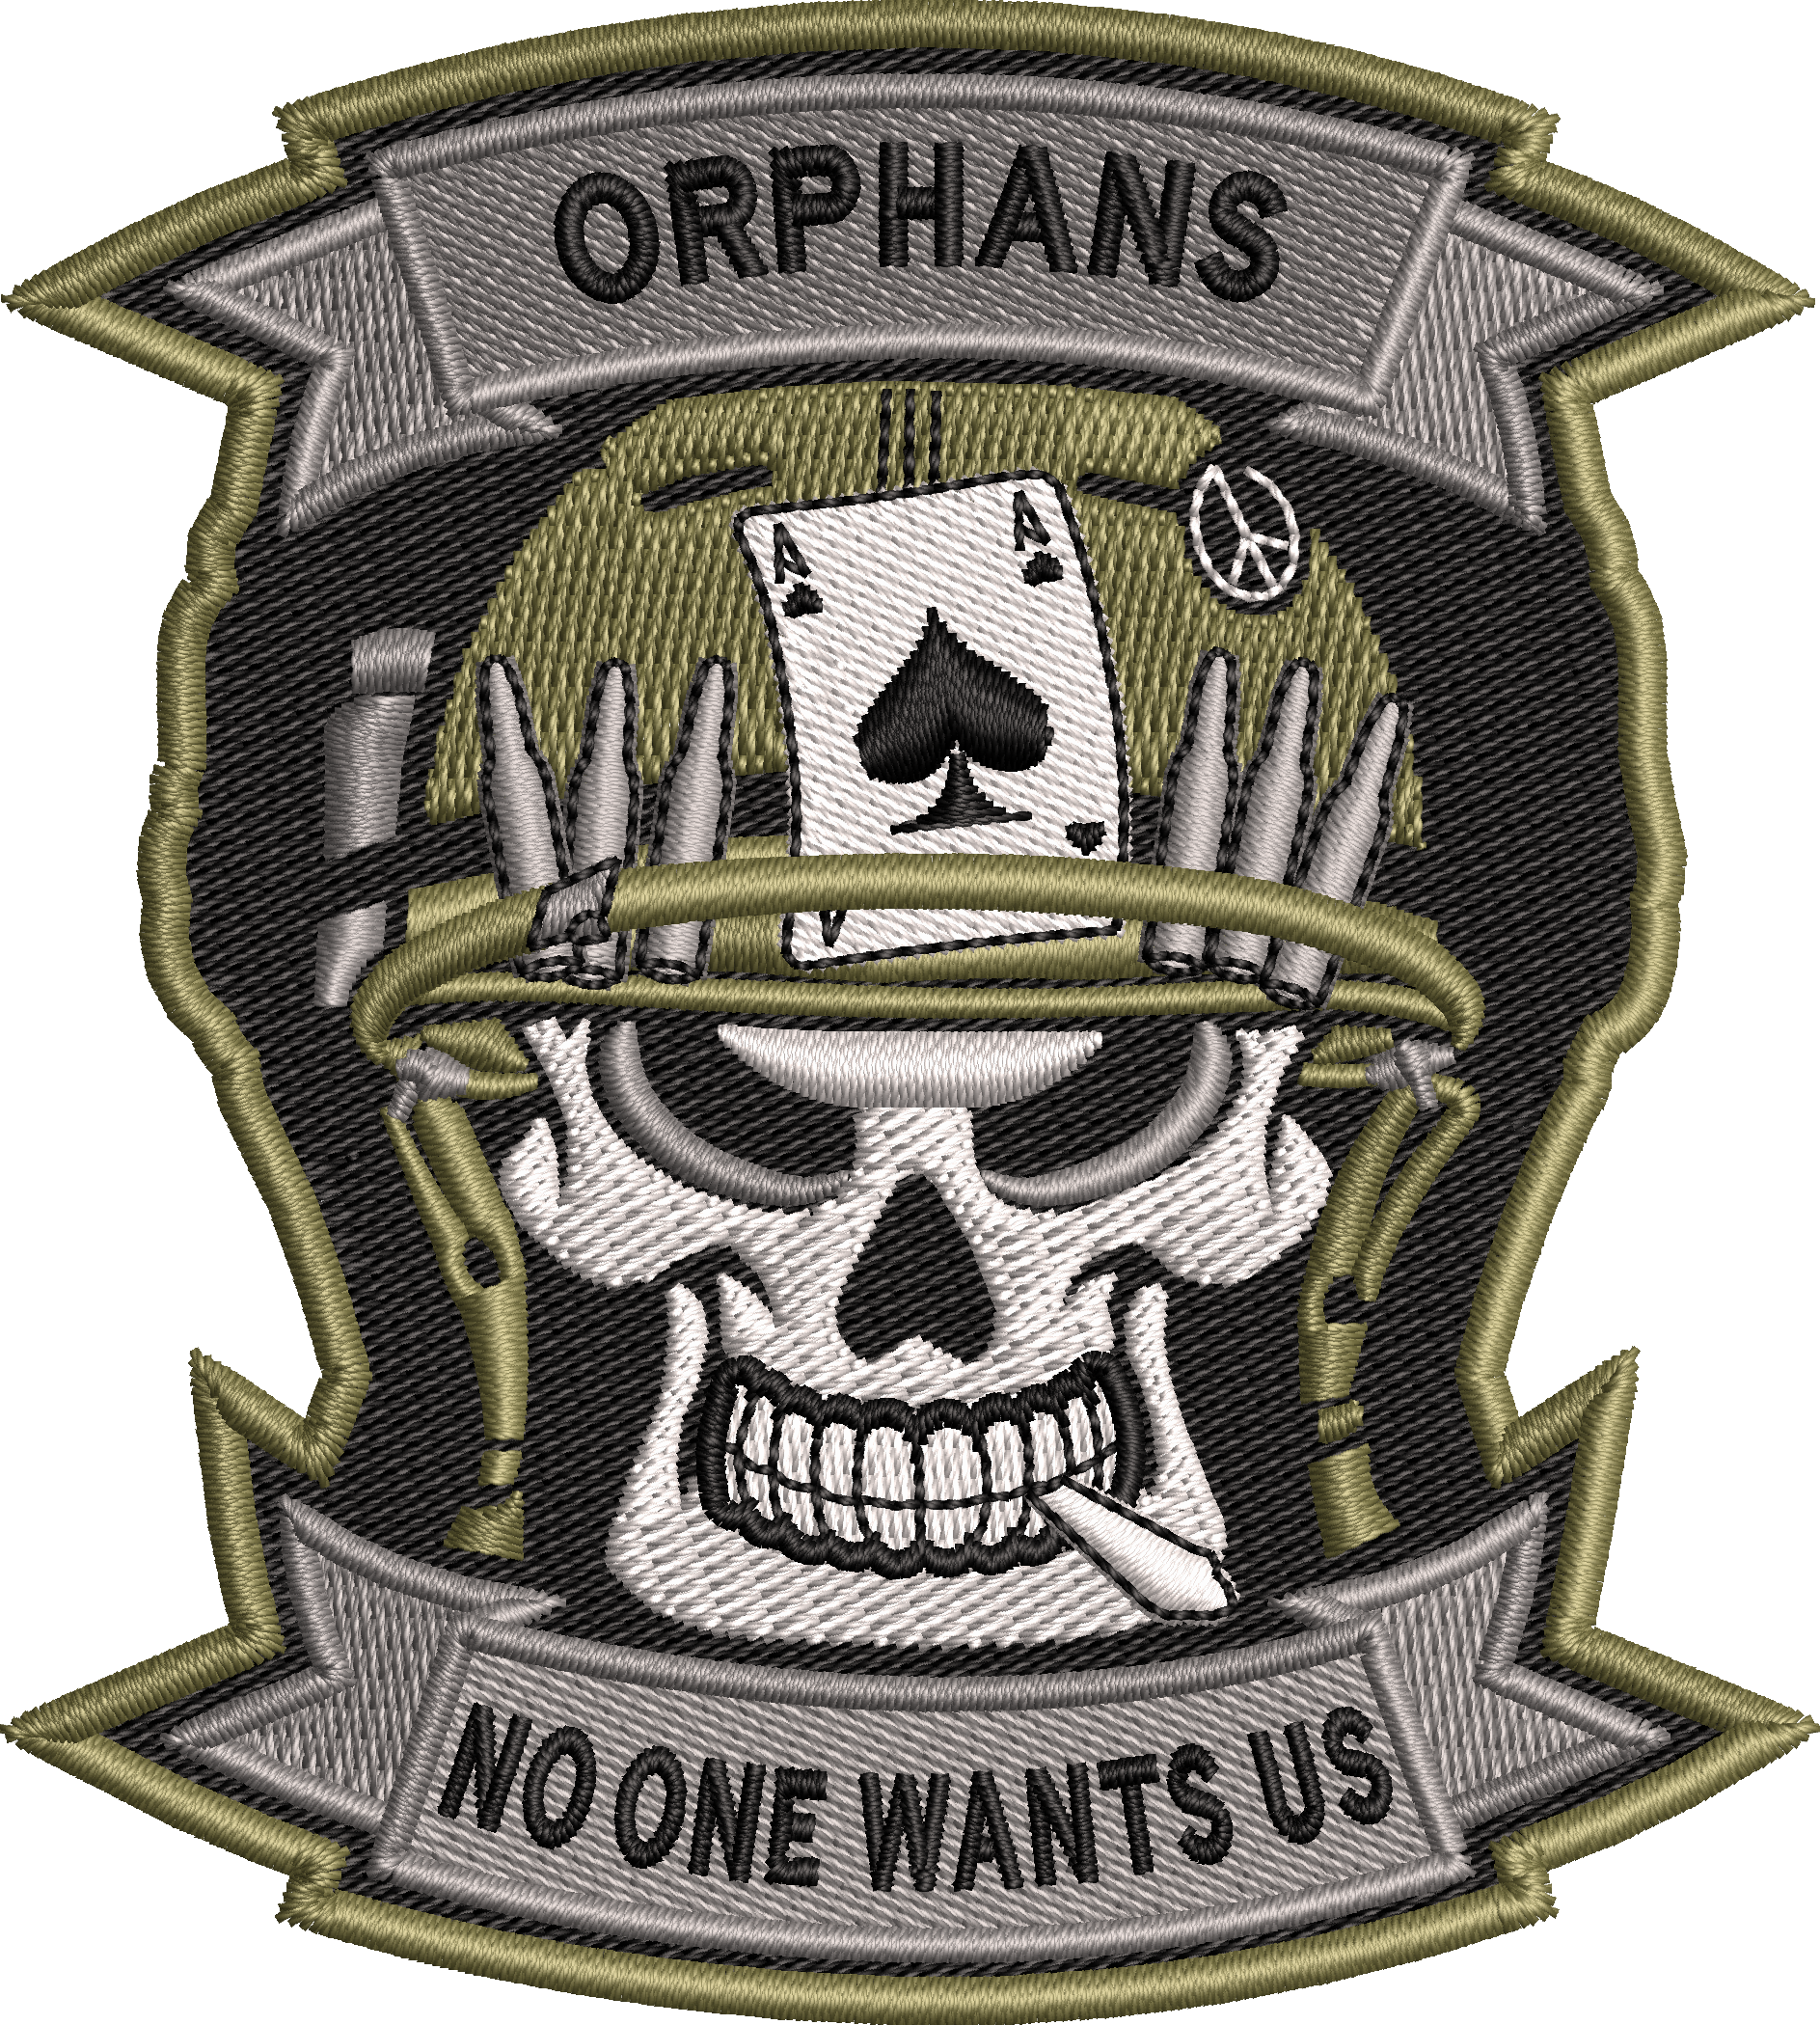 Orphans NO ONE WANTS US